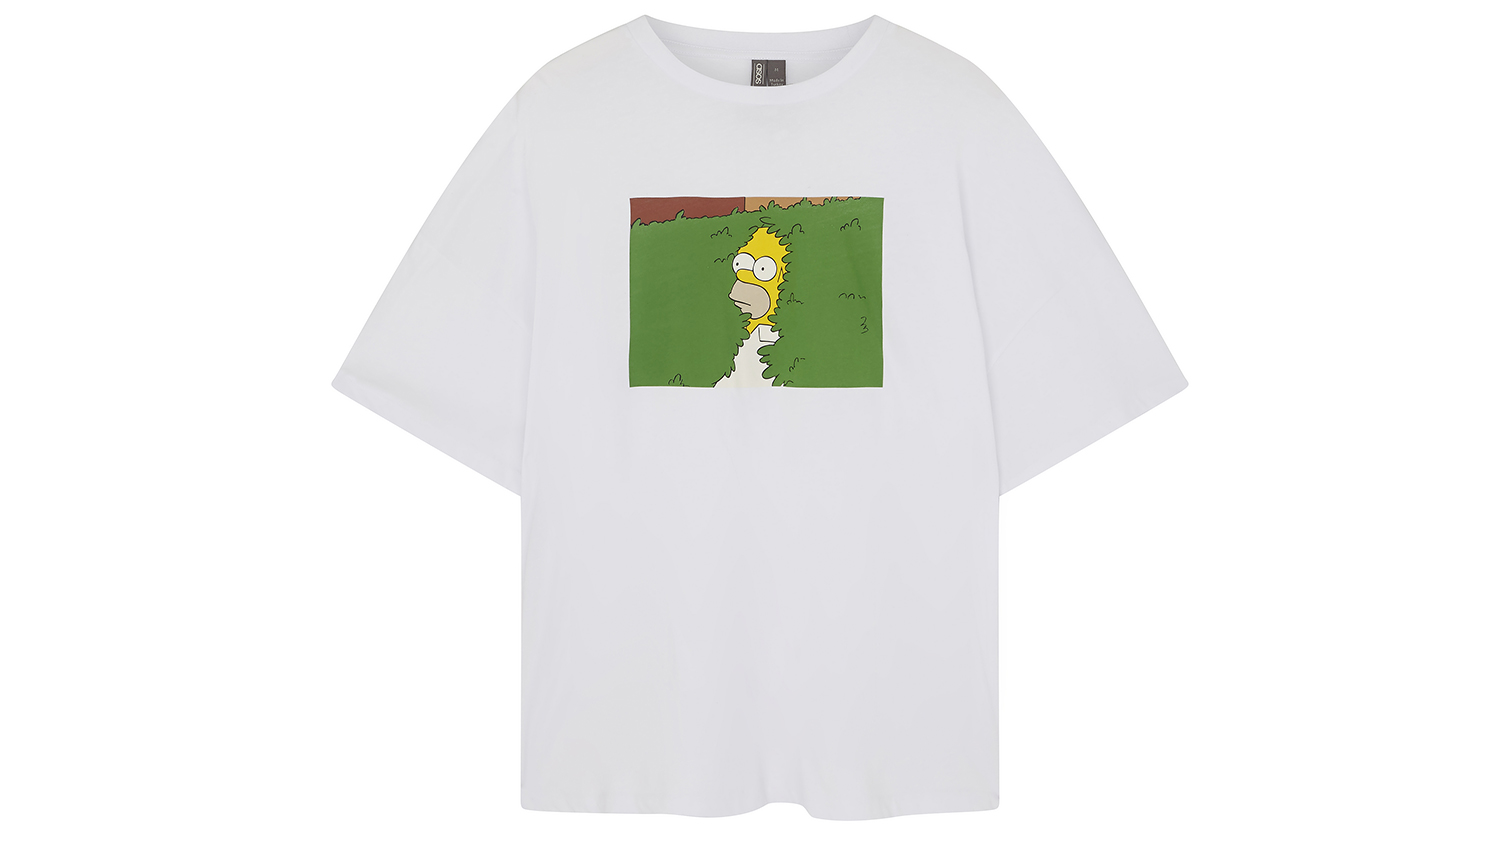 asos x the simpsons collection homerteewhite